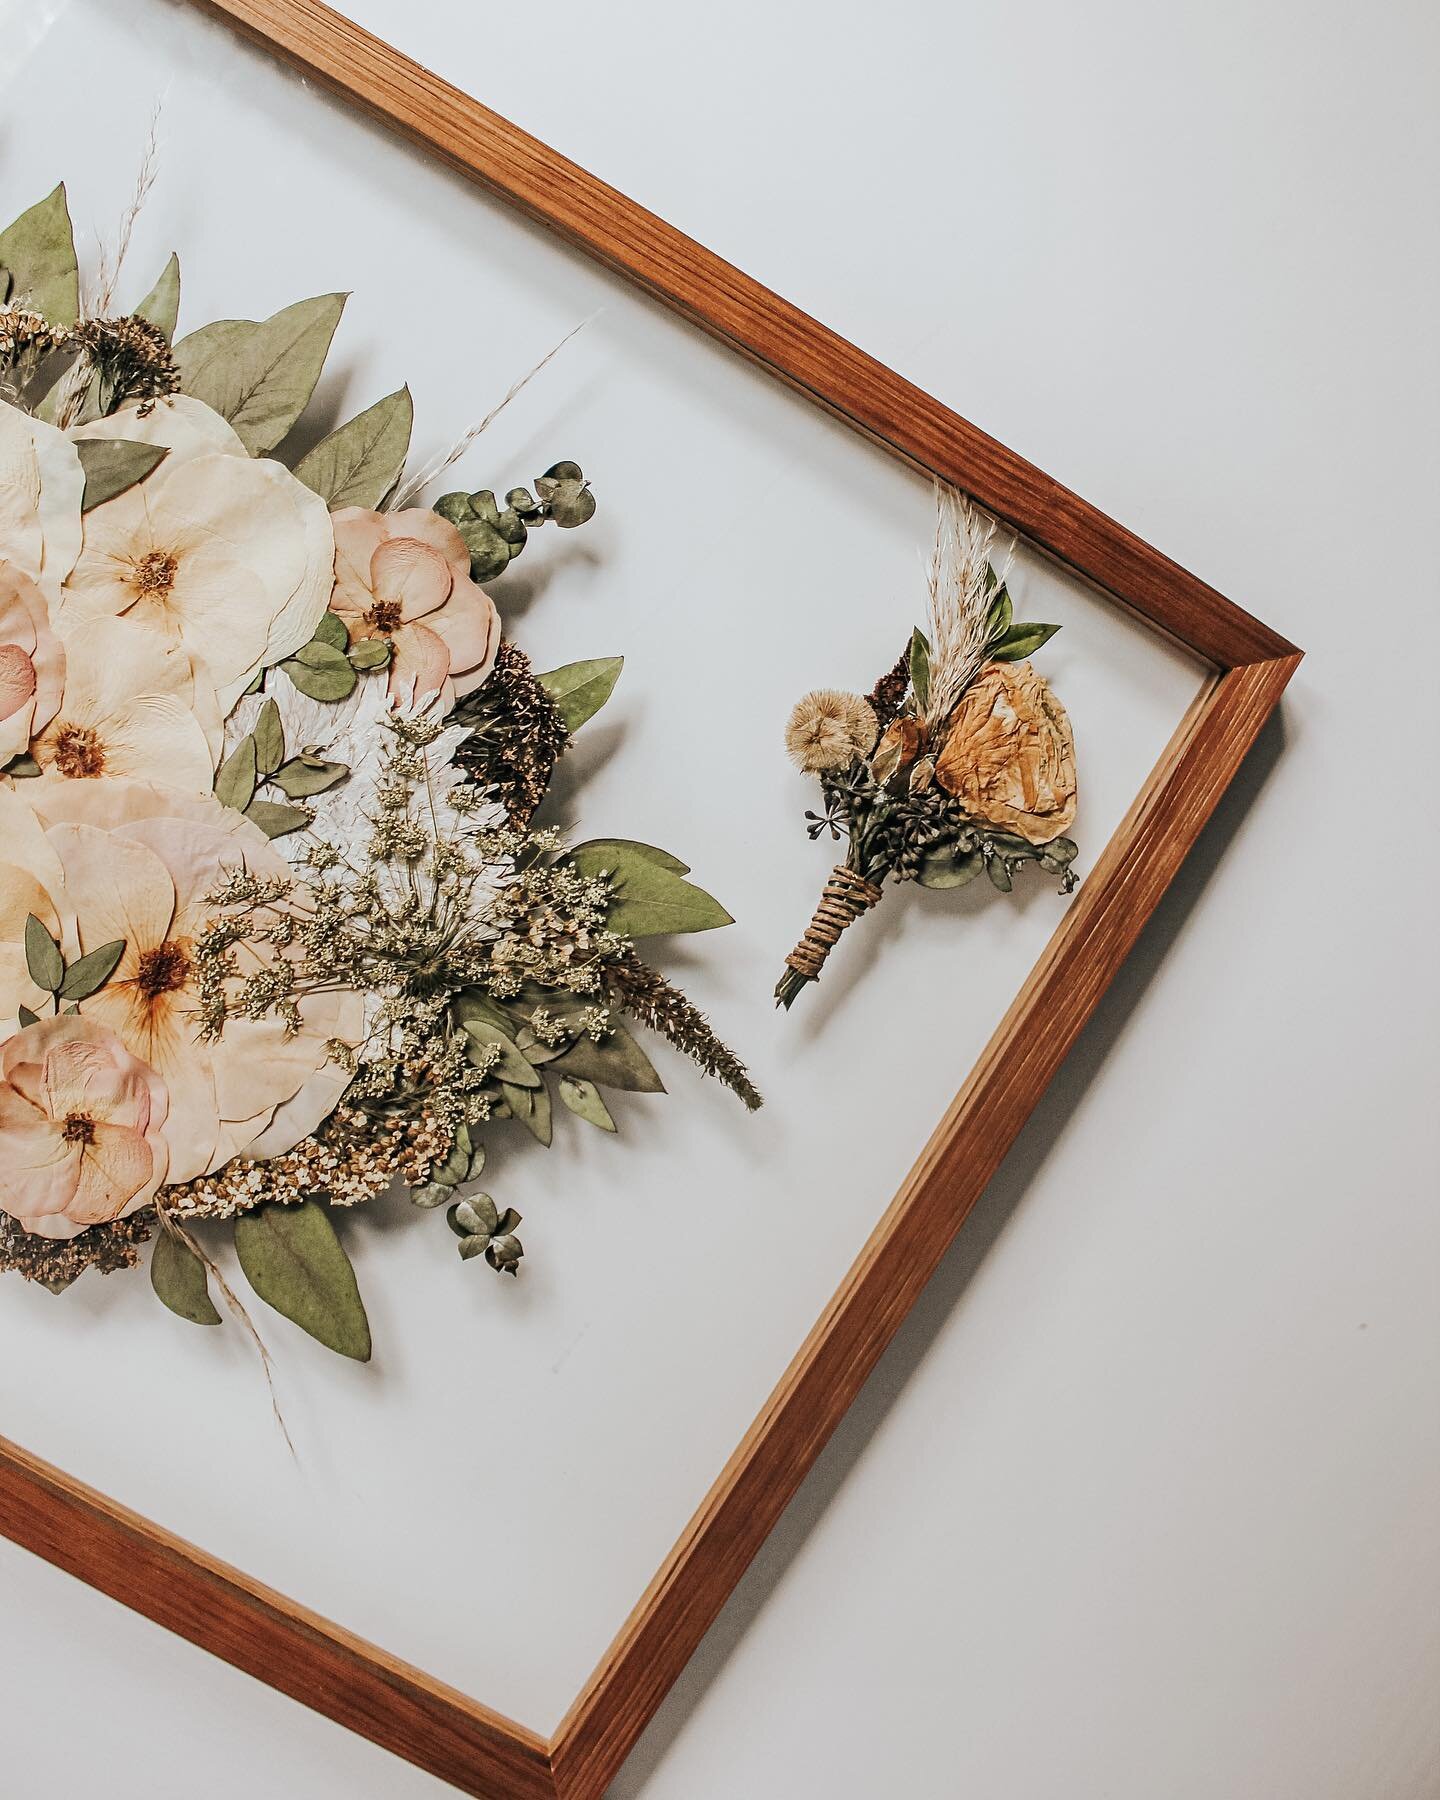 Let&rsquo;s talk design 💐 My favorite part of floral preservation 🫶🏼
The possibilities are endless when it comes to designing your special press.
When your florals are officially ready to be designed and arranged, I will email you several predesig